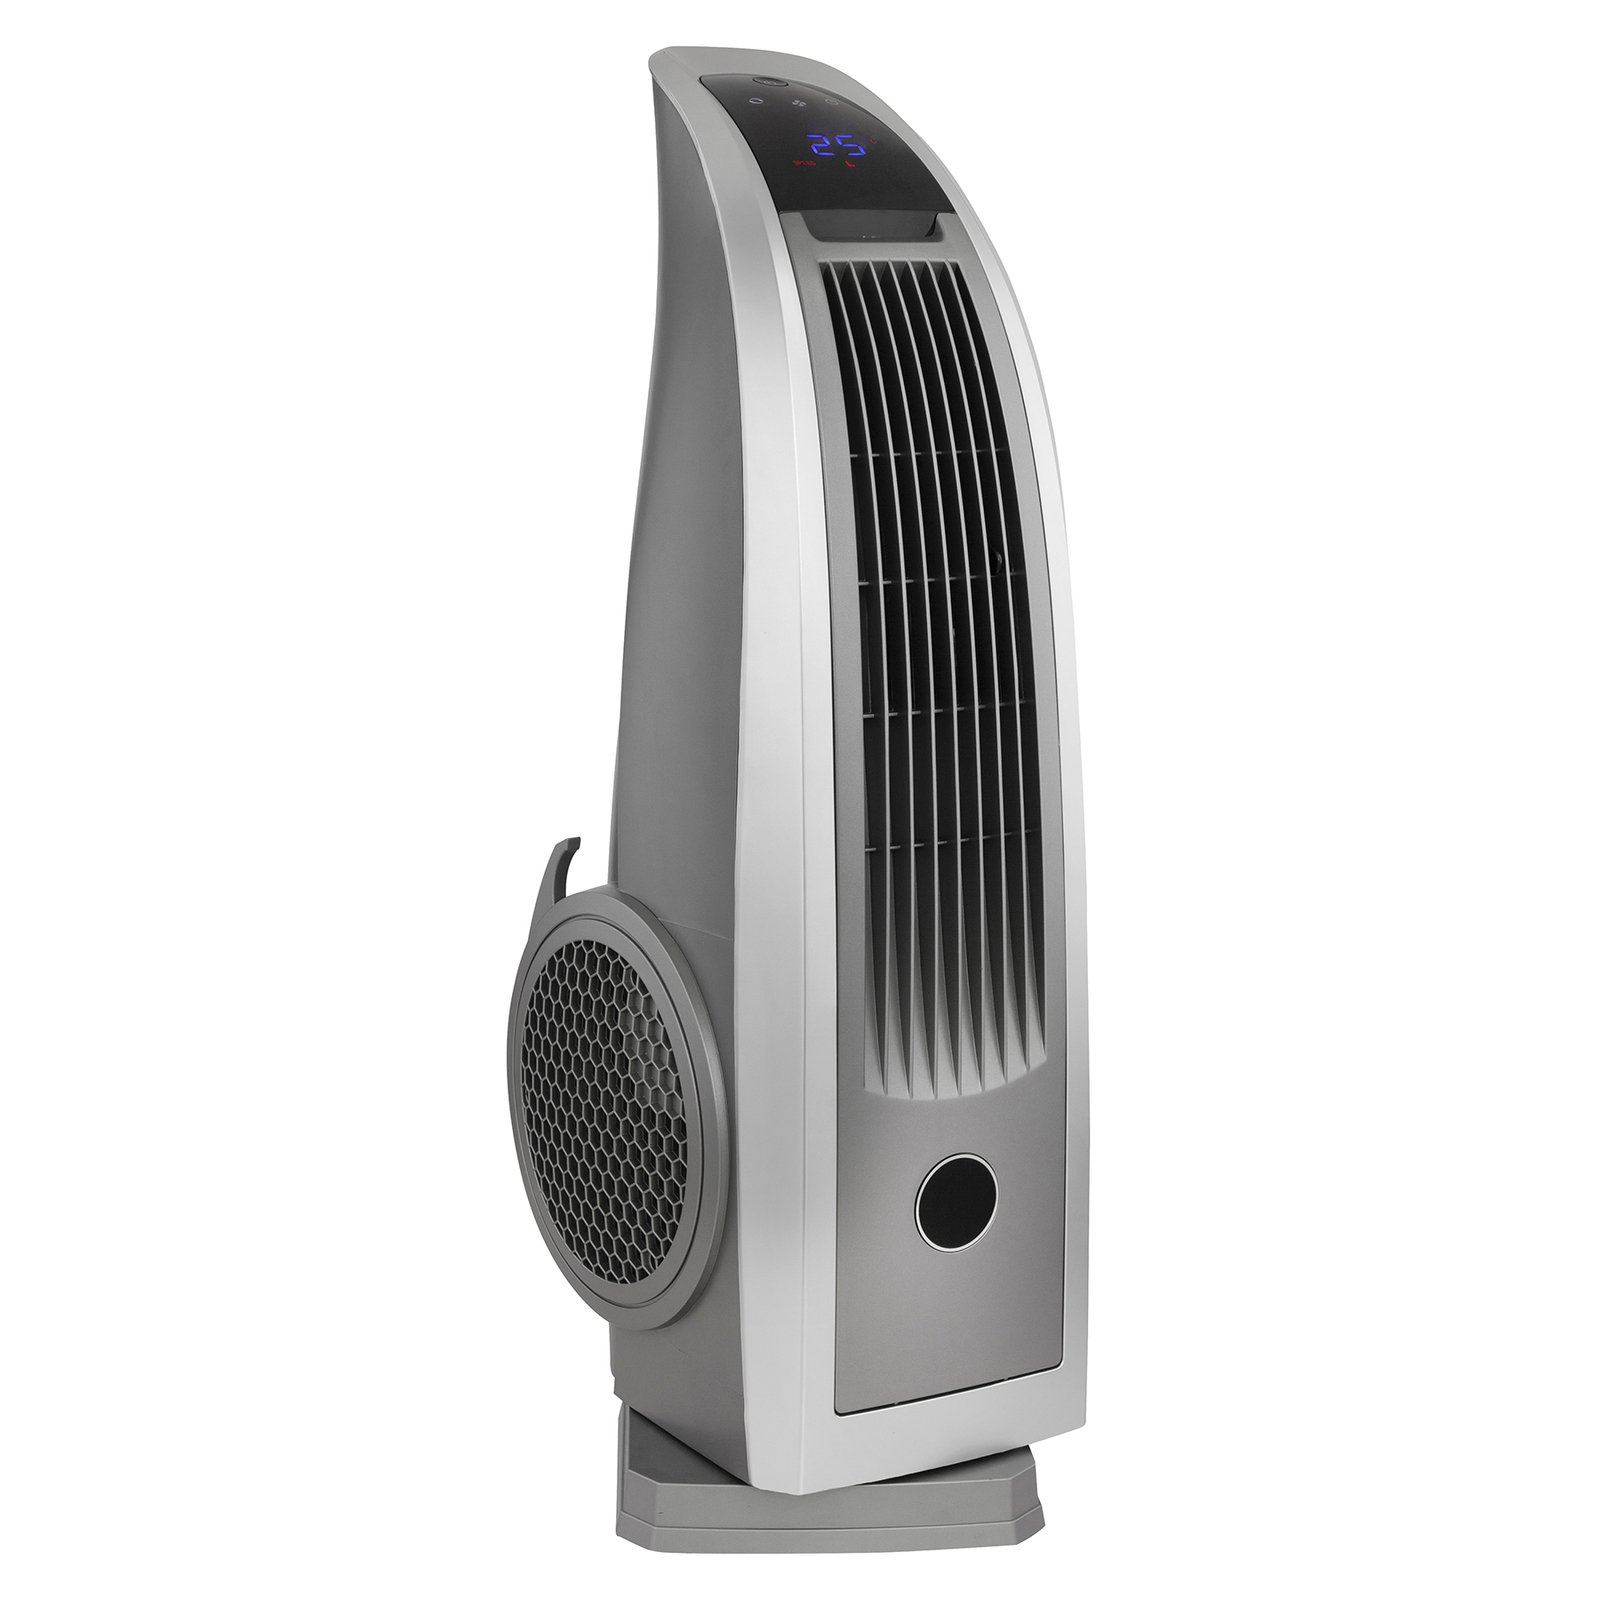 Tower 0455 tower fan, remote control 77 cm